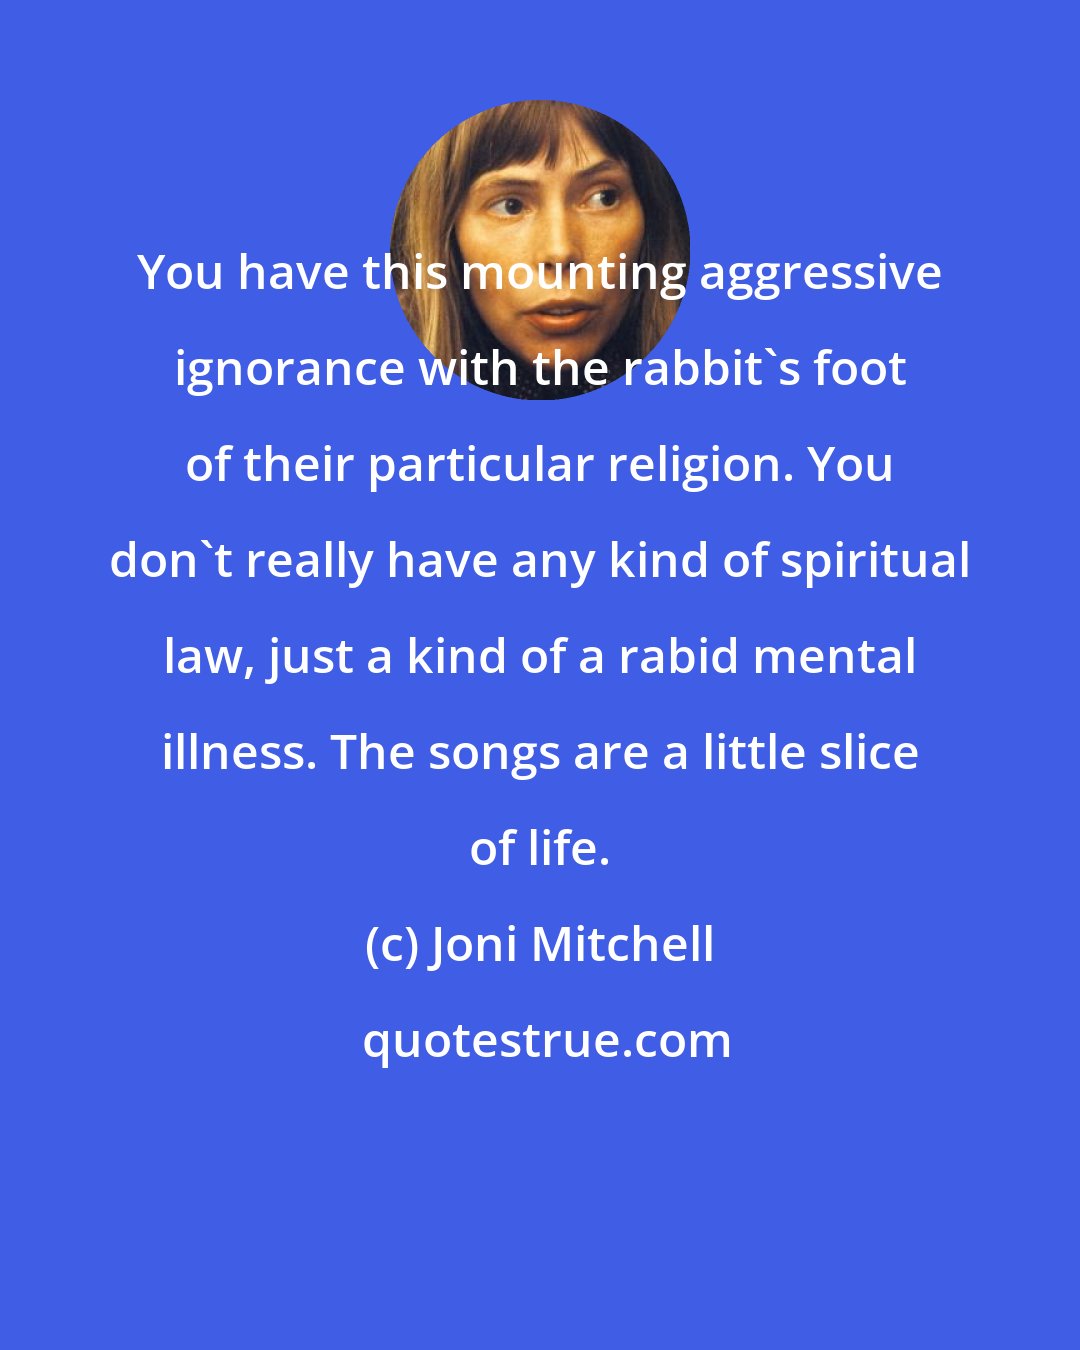 Joni Mitchell: You have this mounting aggressive ignorance with the rabbit's foot of their particular religion. You don't really have any kind of spiritual law, just a kind of a rabid mental illness. The songs are a little slice of life.